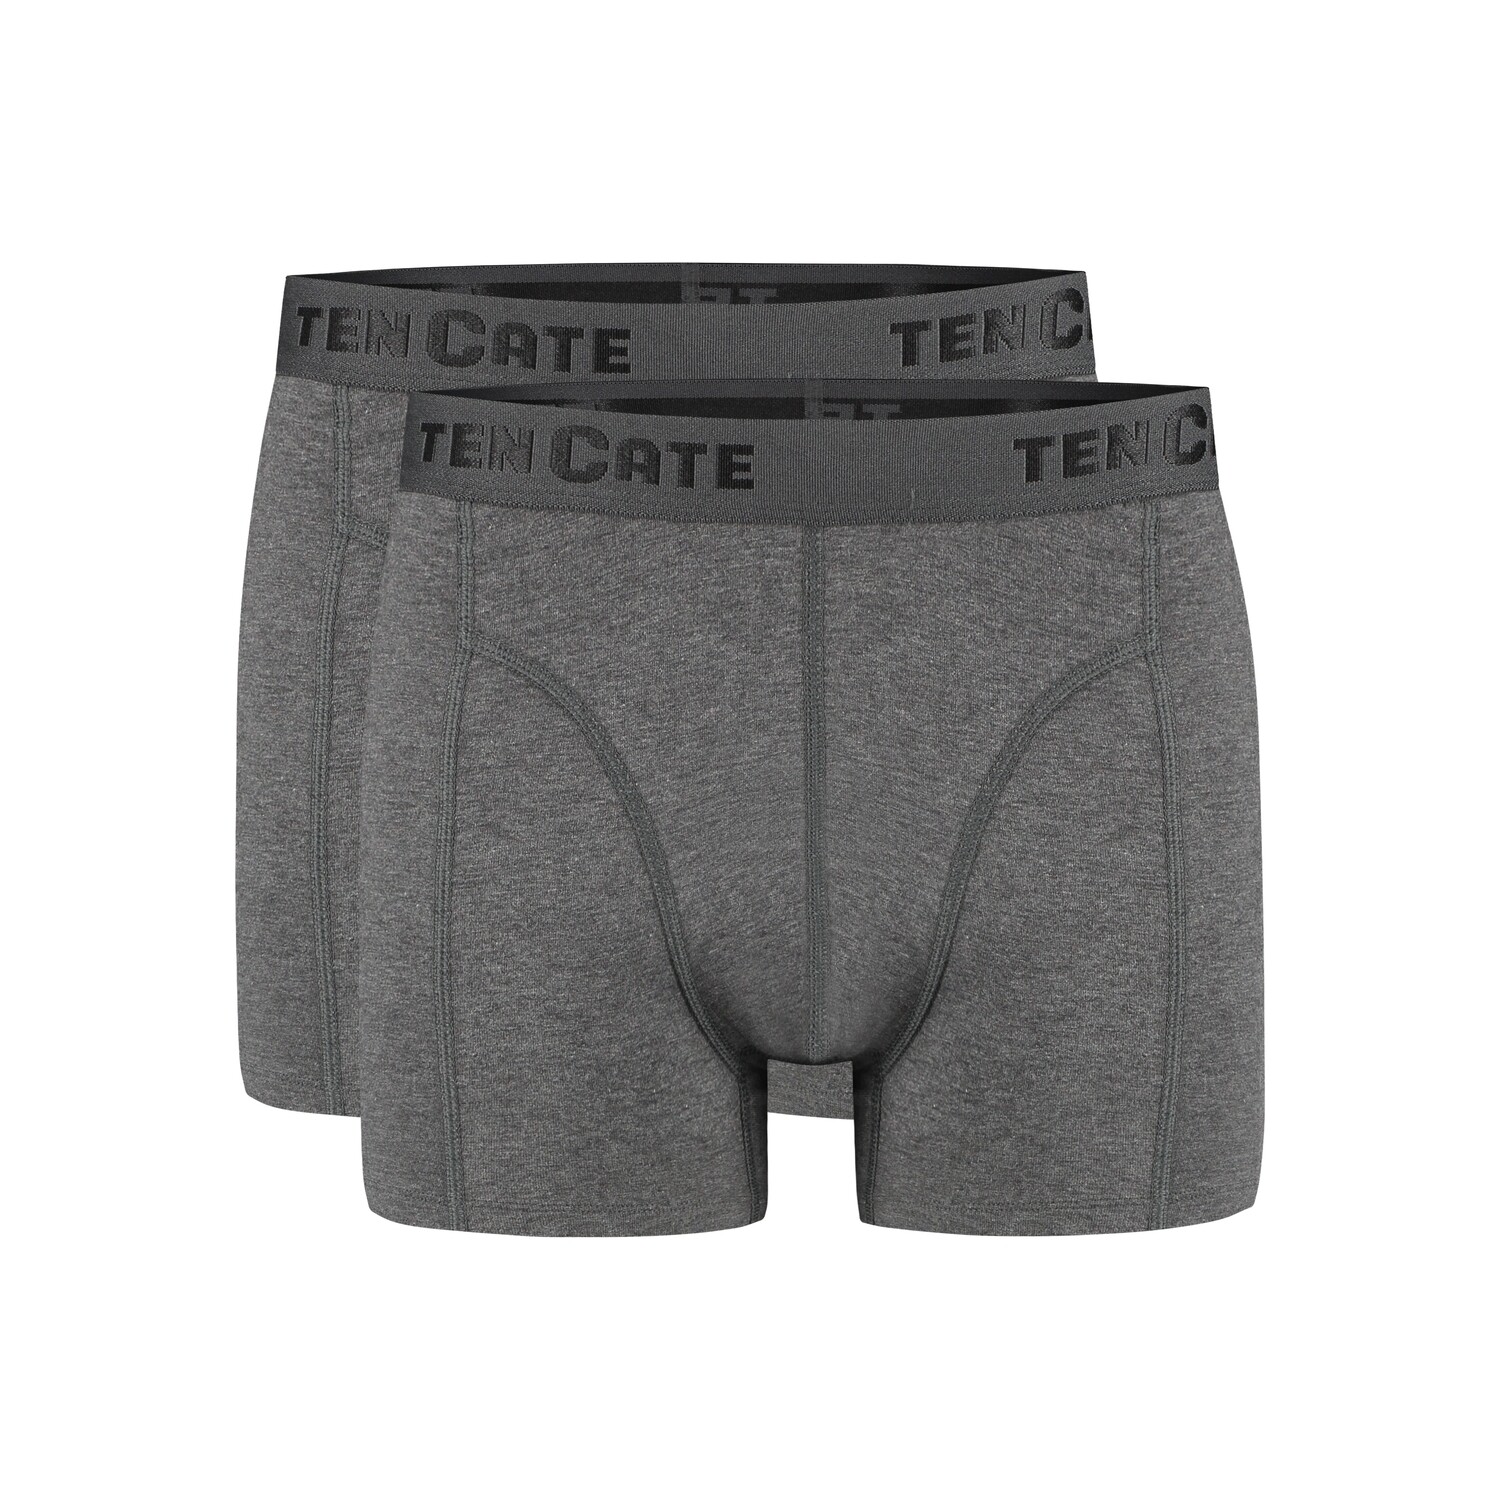 Ten Cate 32323 basic shorts Antraciet, Size: M